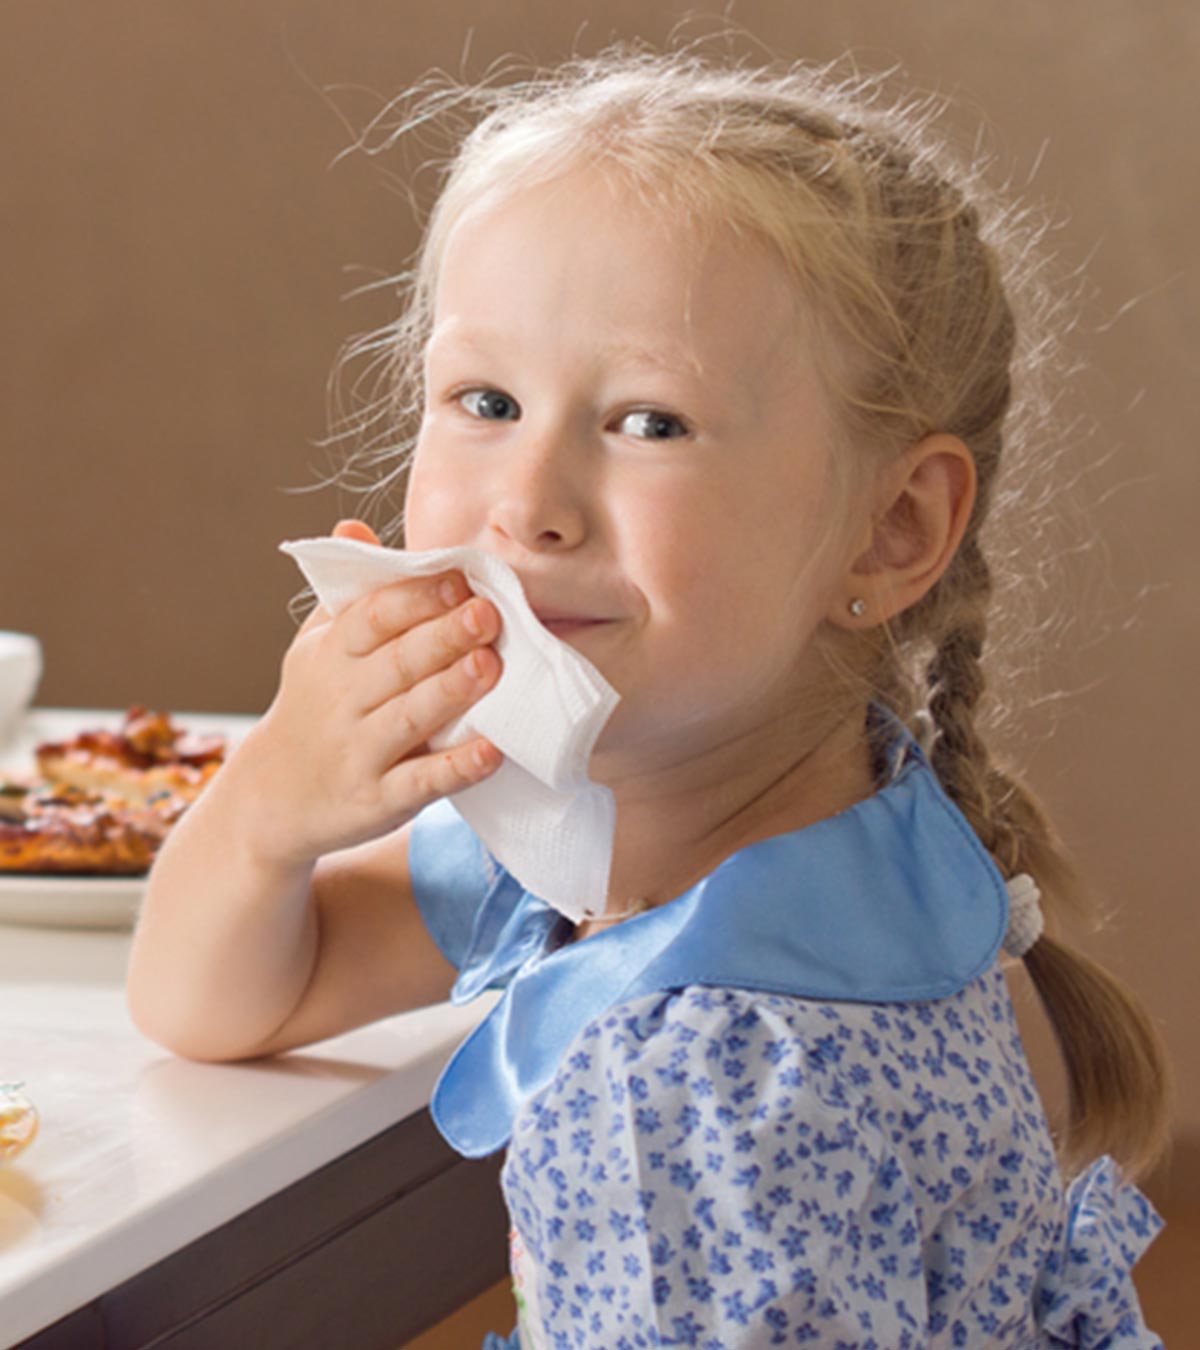 15 Table Manners For Kids Of Every Age To Learn And Follow